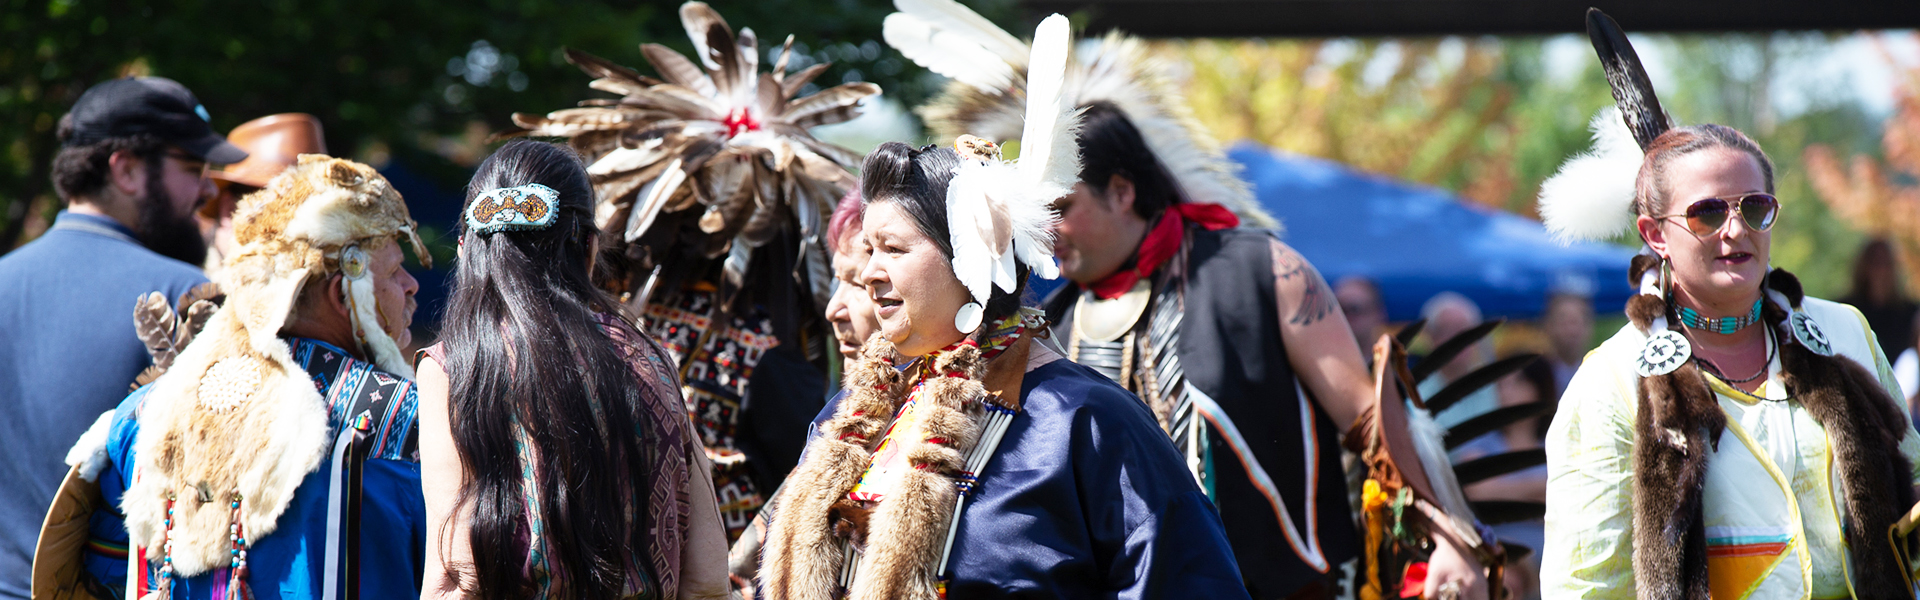 indigenous event on campus